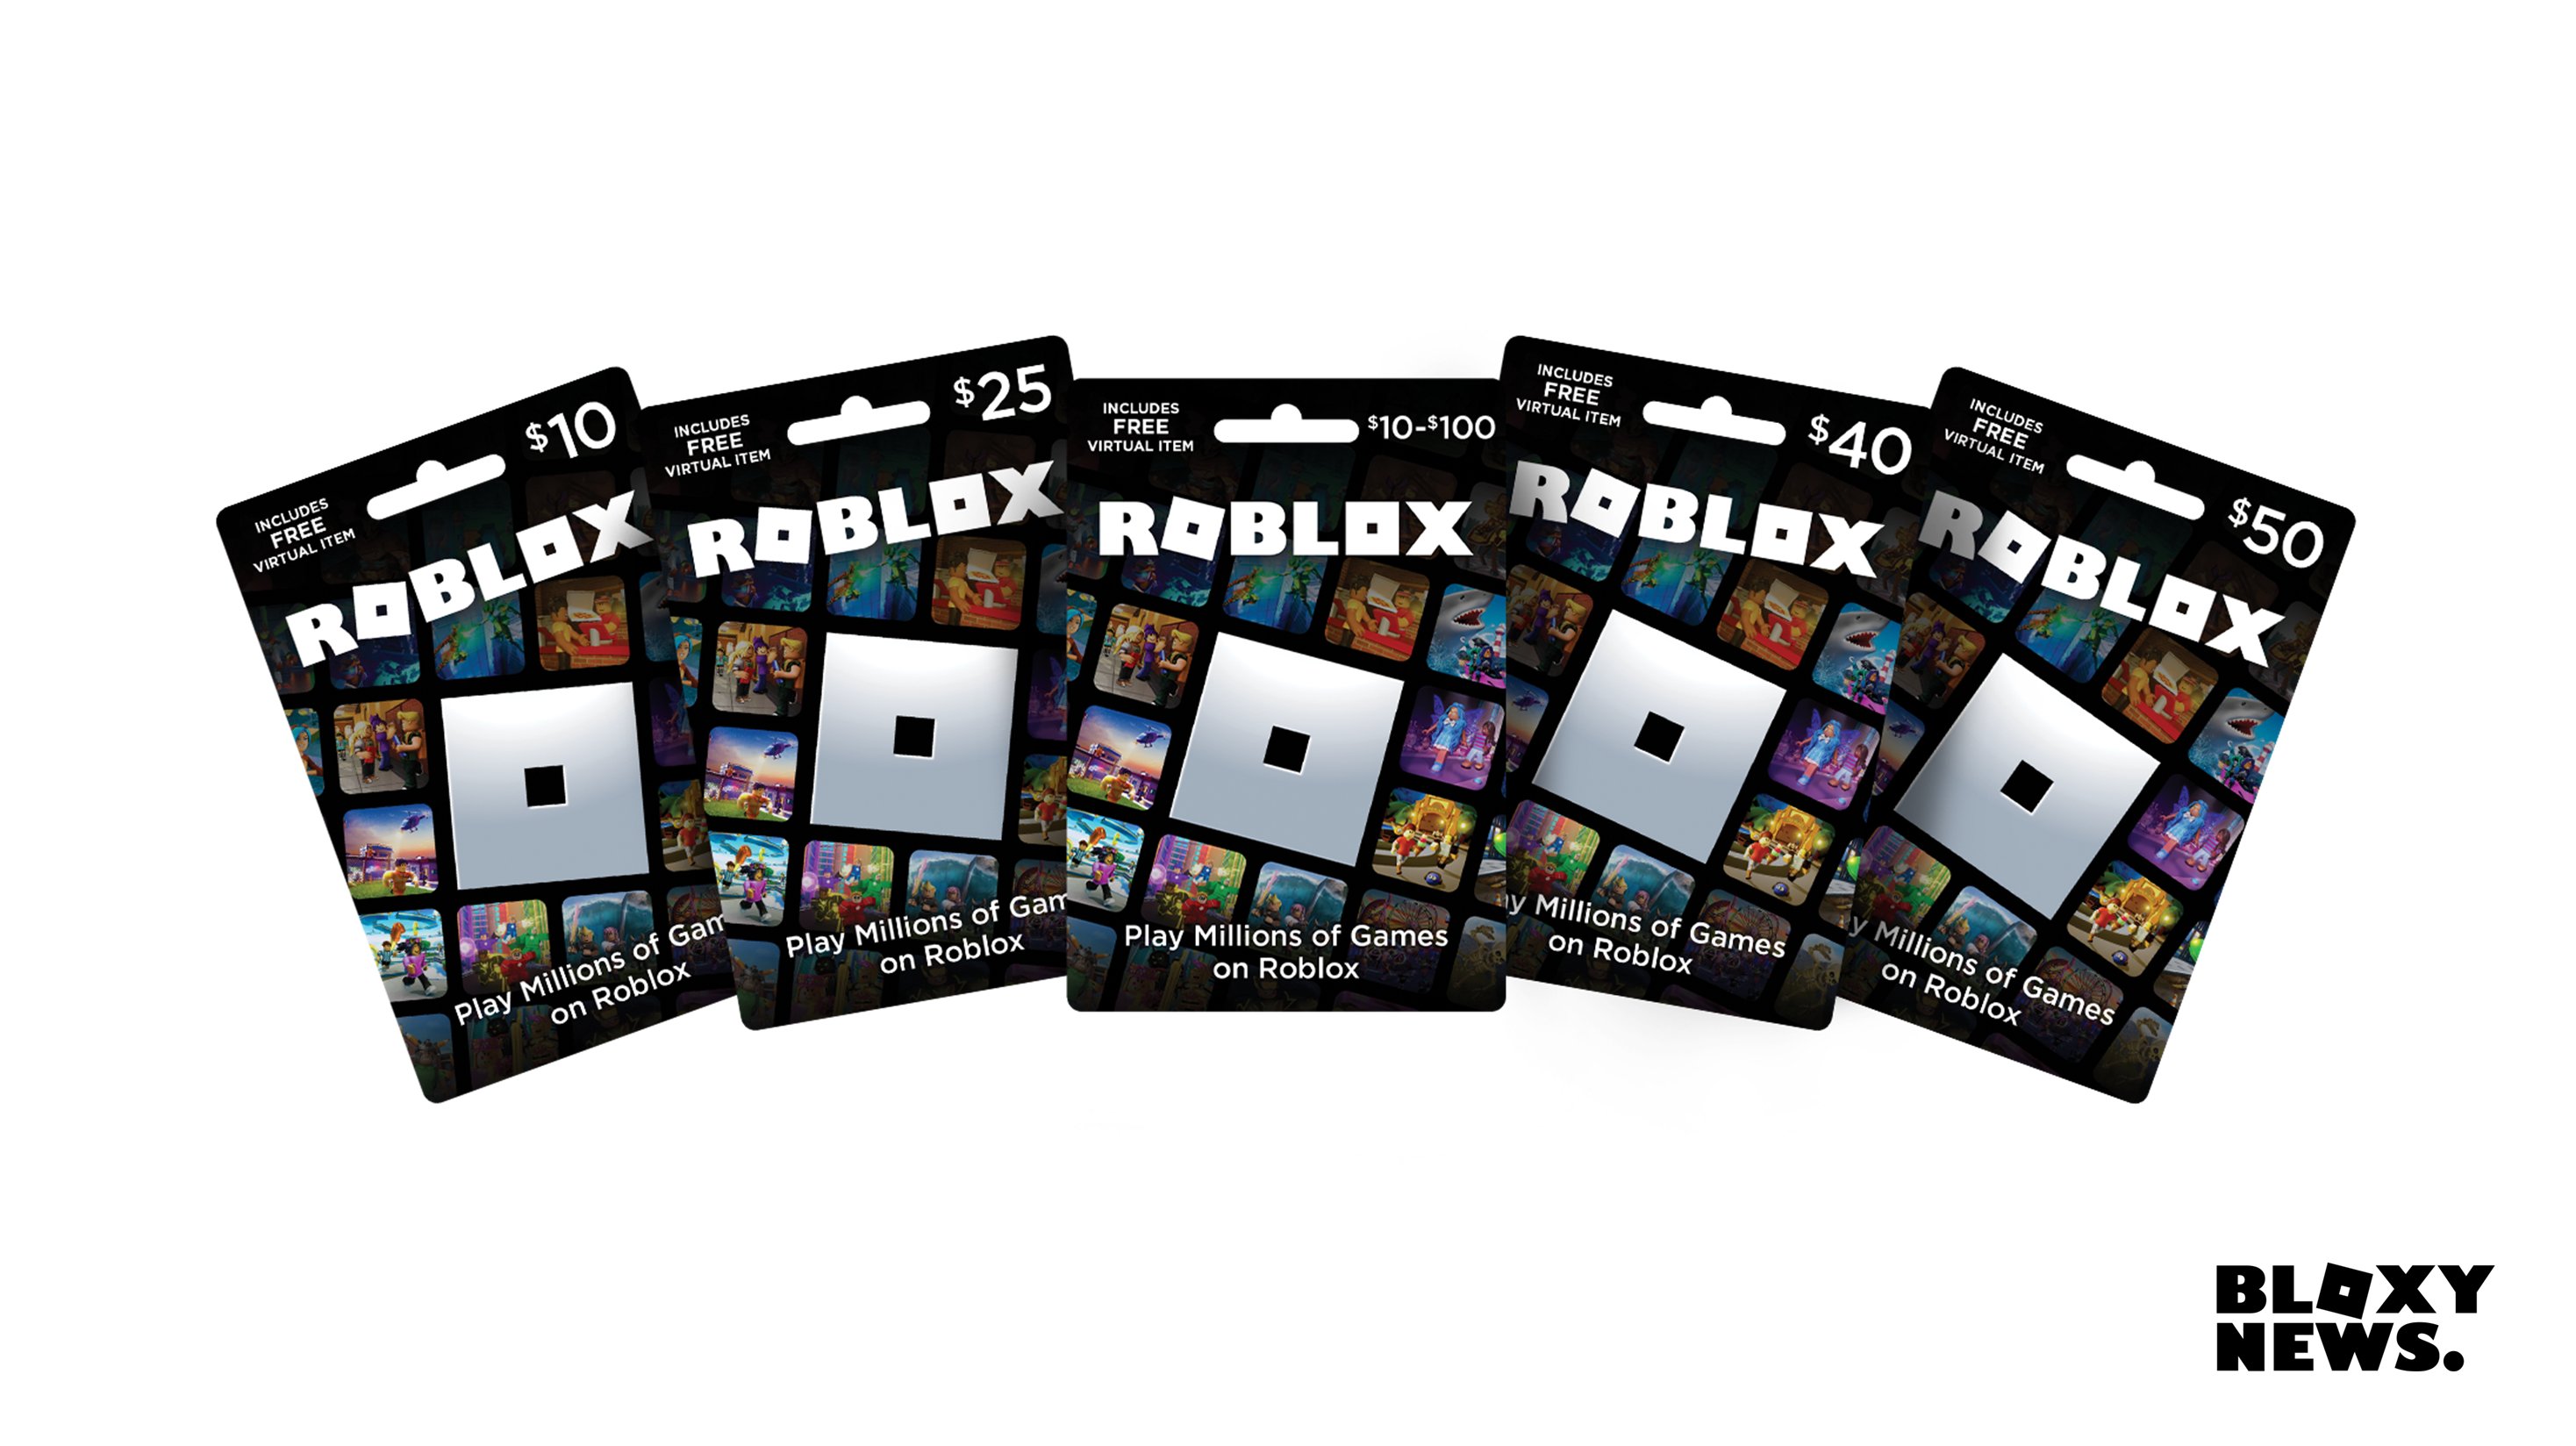 ALL FREE ITEMS ON ROBLOX (WORKING JANUARY 2020